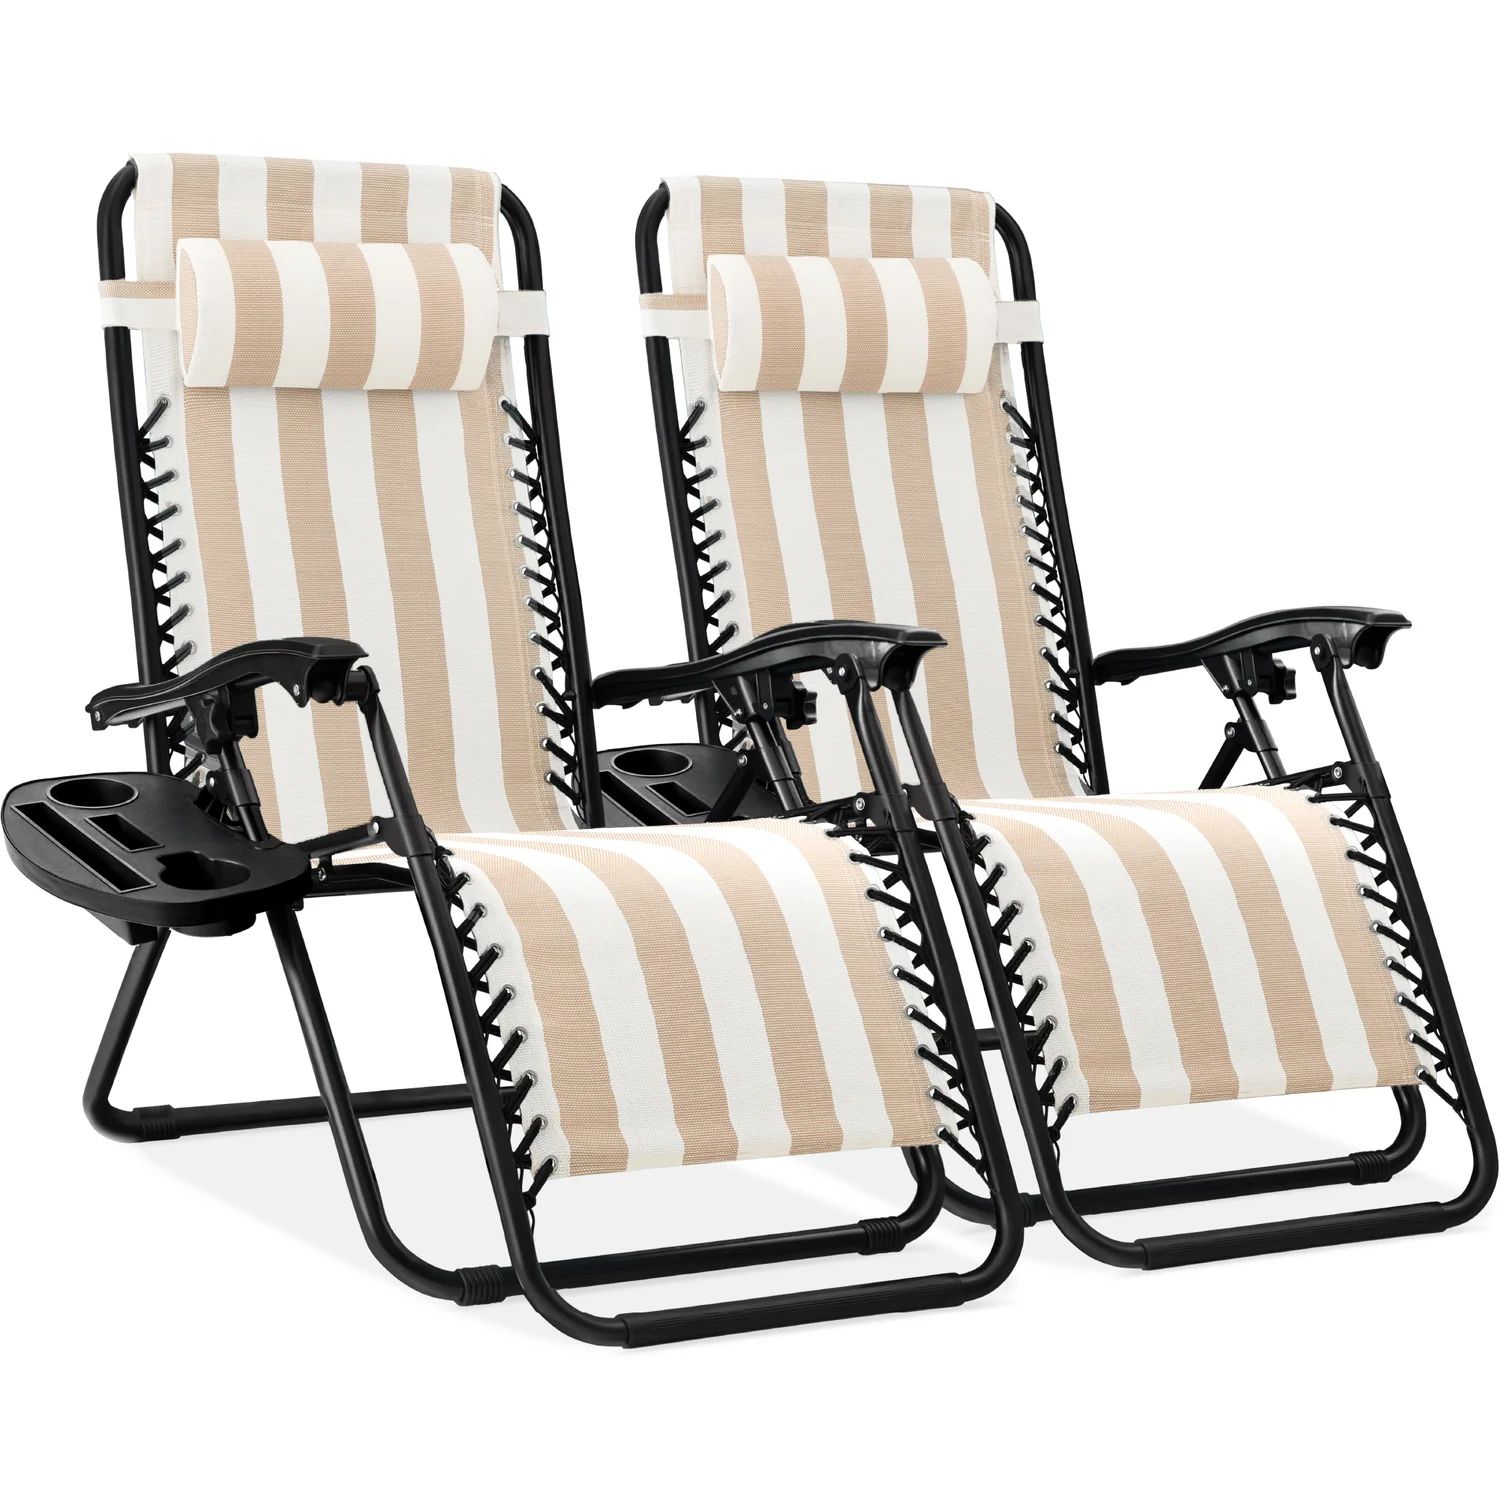 Set of 2 Adjustable Zero Gravity Patio Chair Recliners w/ Cup Holders | Best Choice Products 